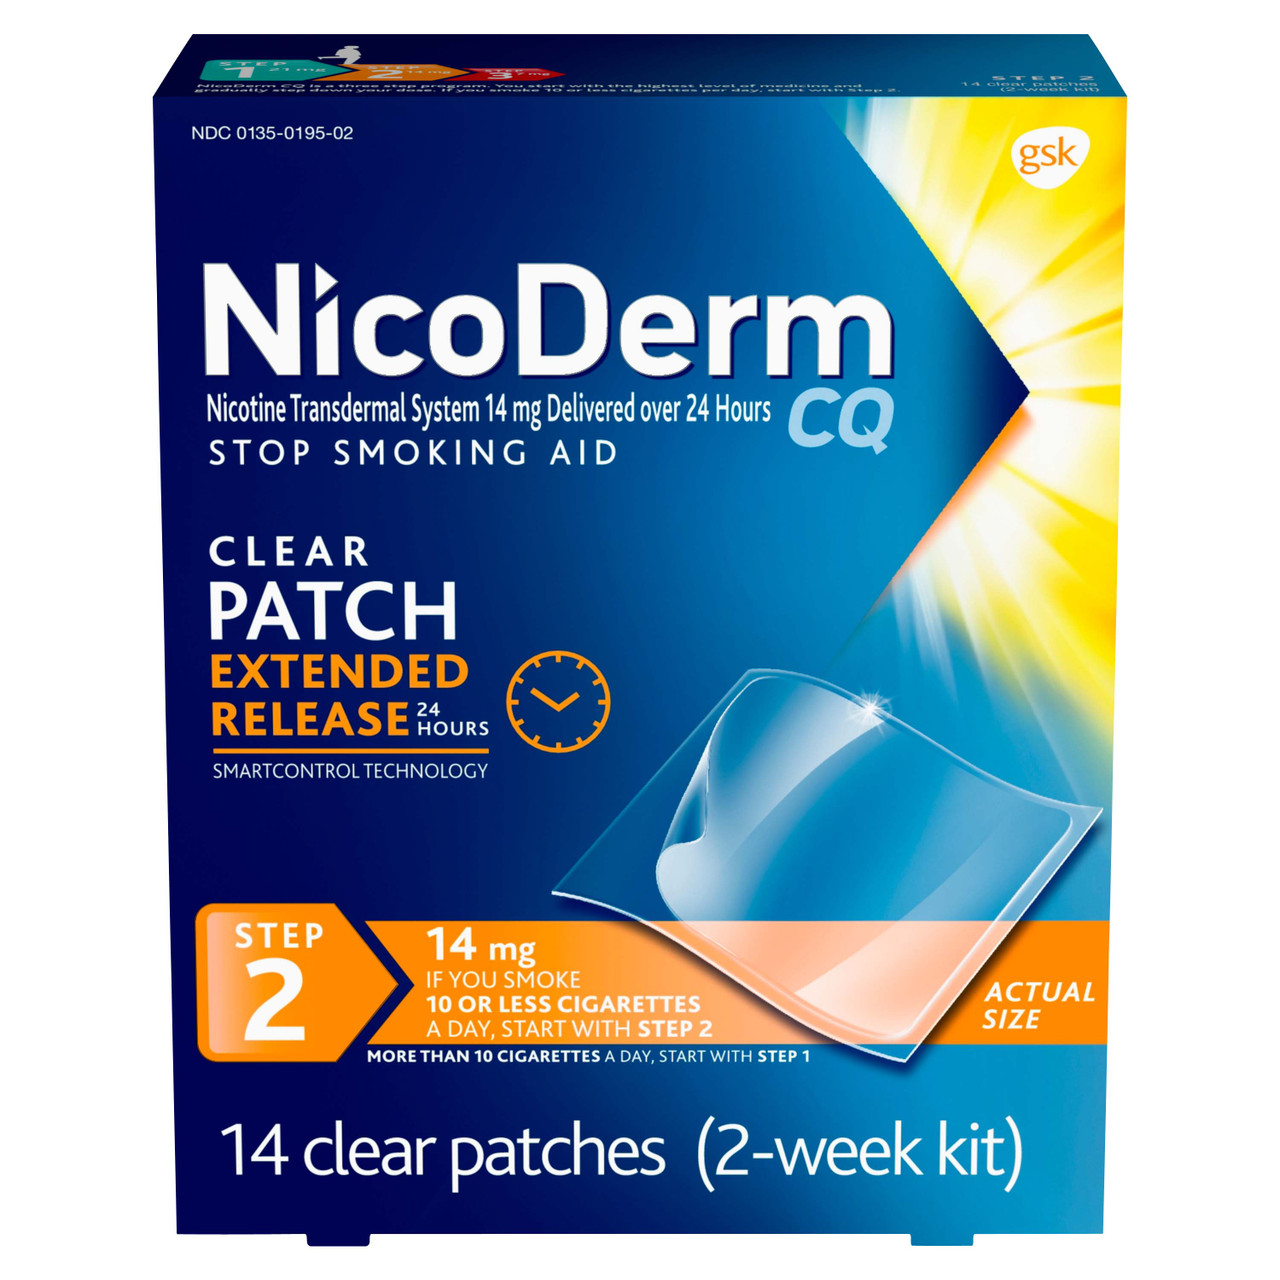 Can You Wear 2 Nicotine Patches at Once?